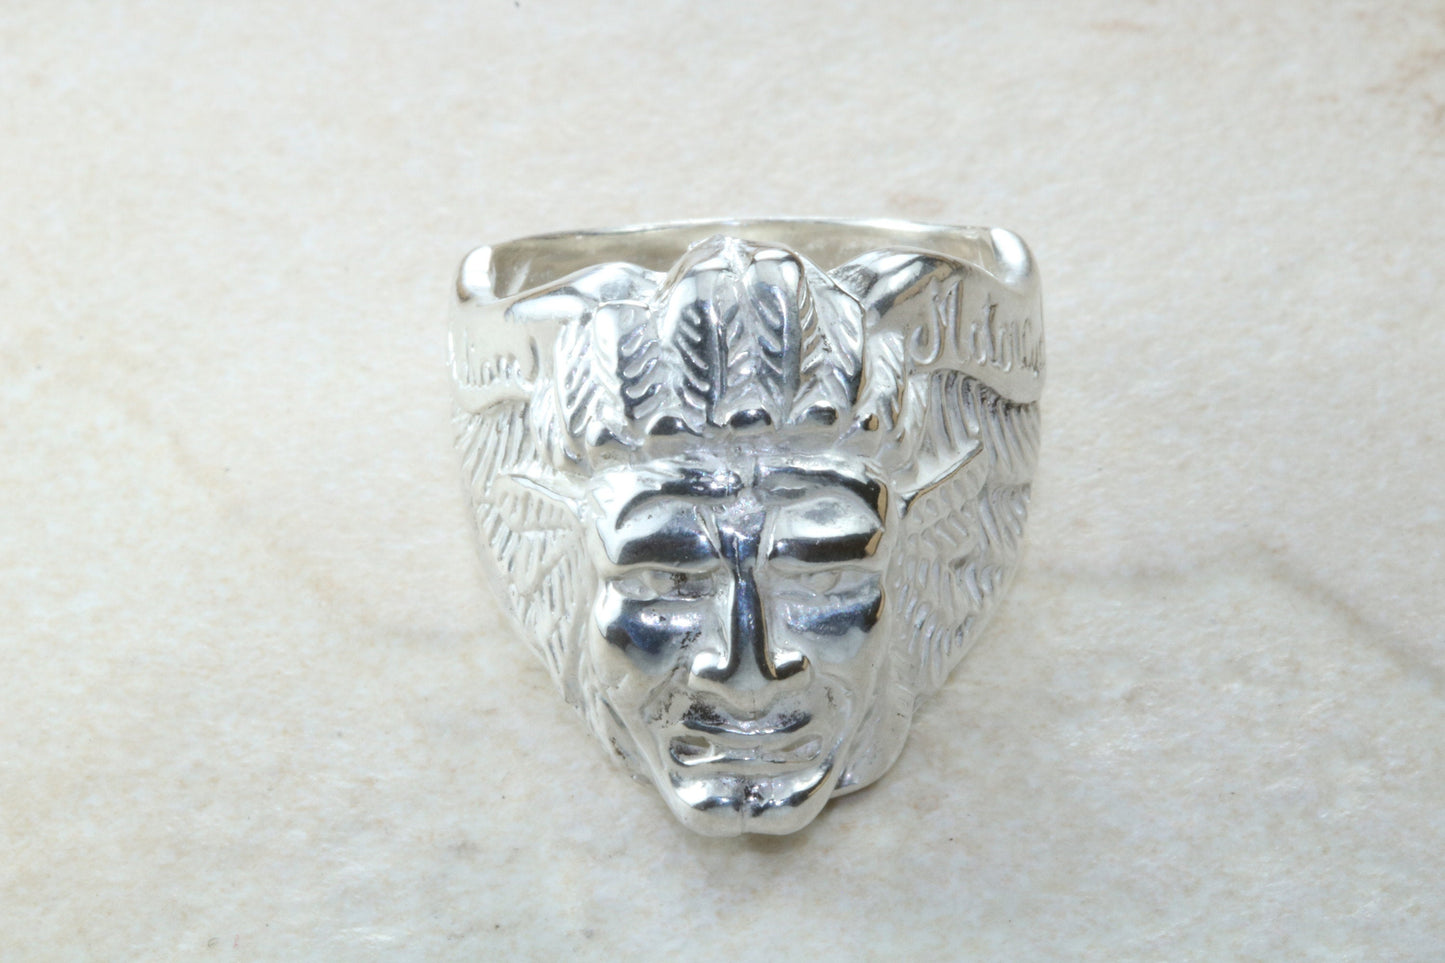 Large and heavy American Indian head ring,solid silver,unisex for ladies and gents,available in silver, yellow gold, white gold and platinum